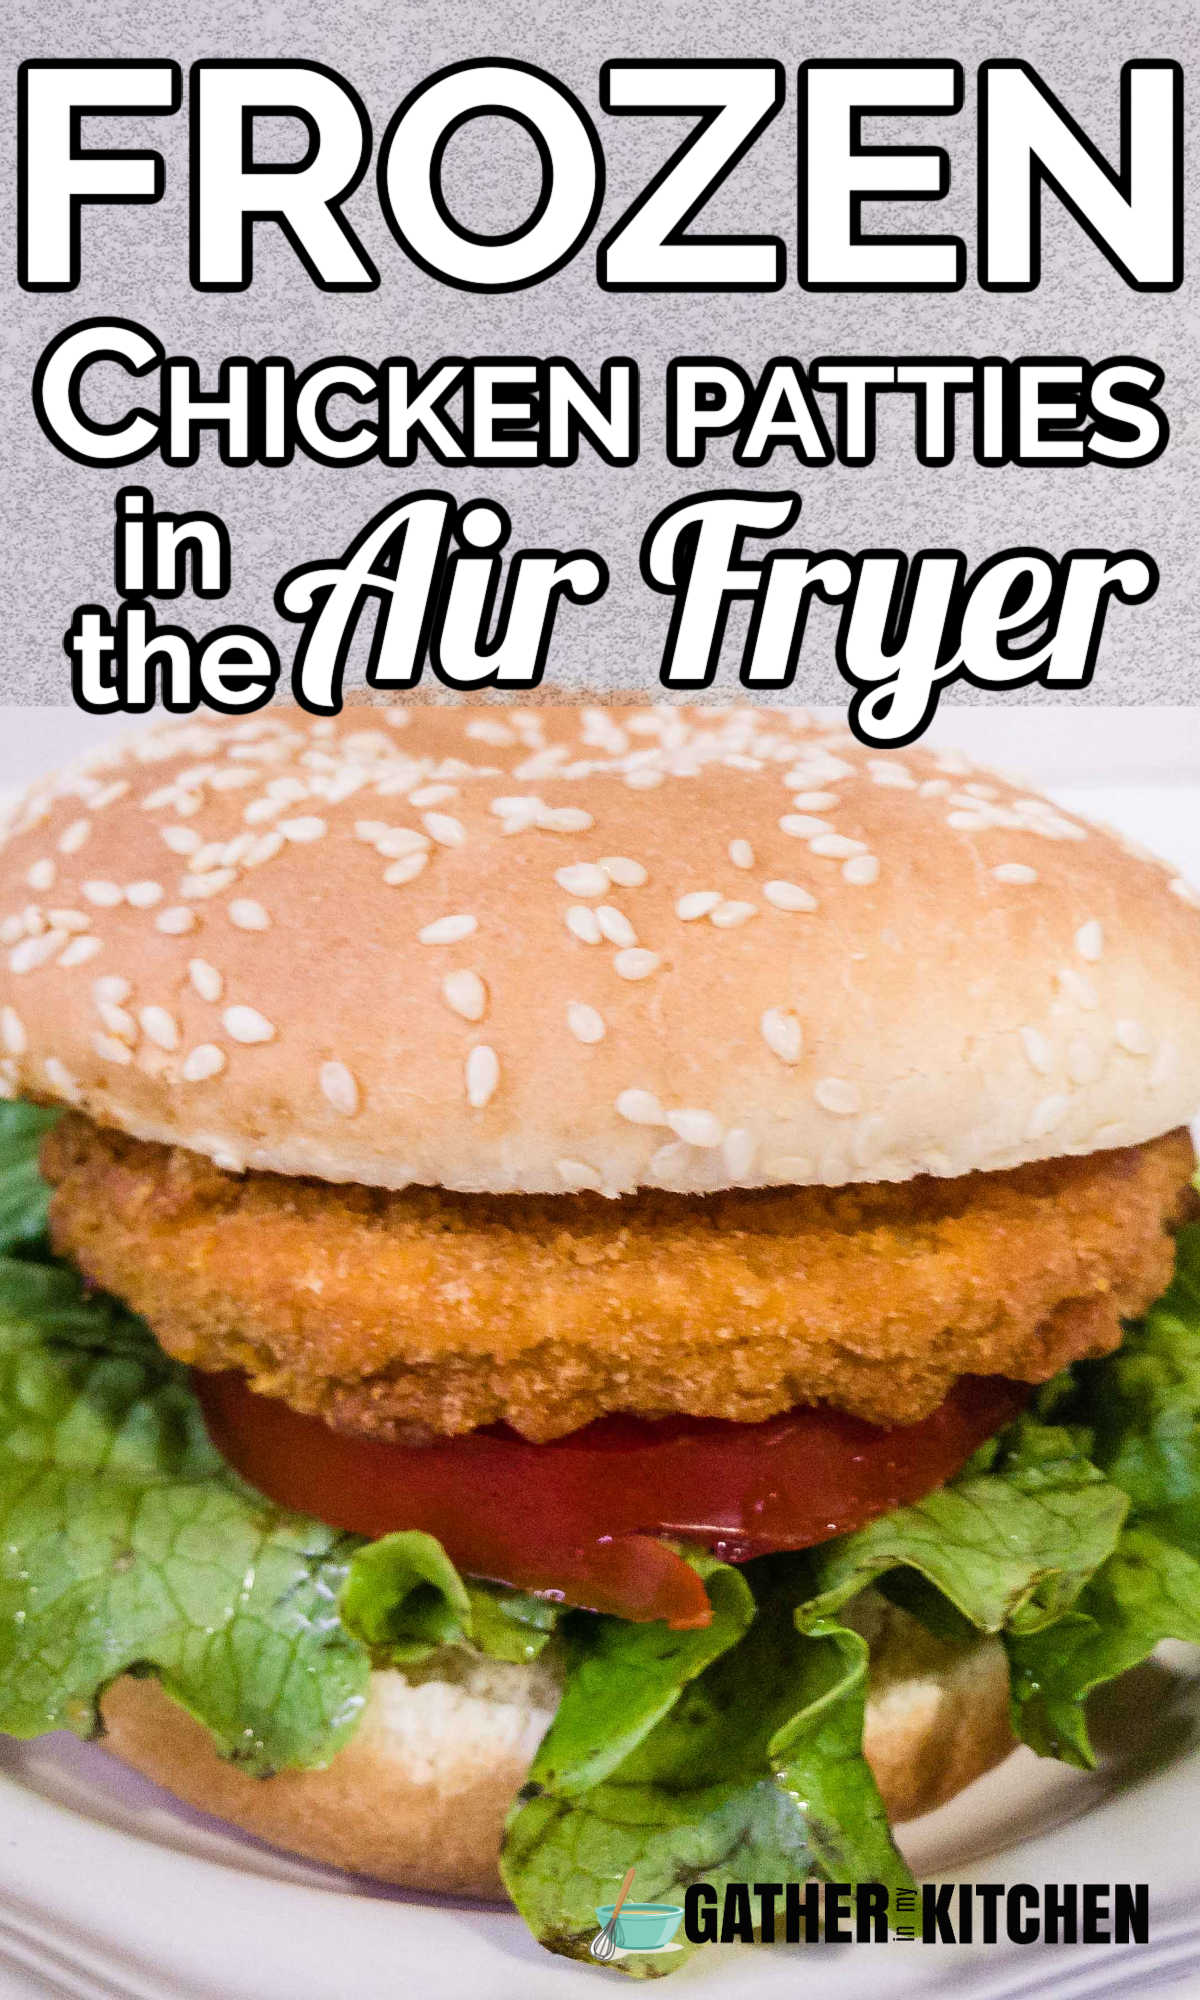 Pin Image: top says "Frozen Chicken Patties in the Air Fryer" with a pic of a chicken sandwich under.